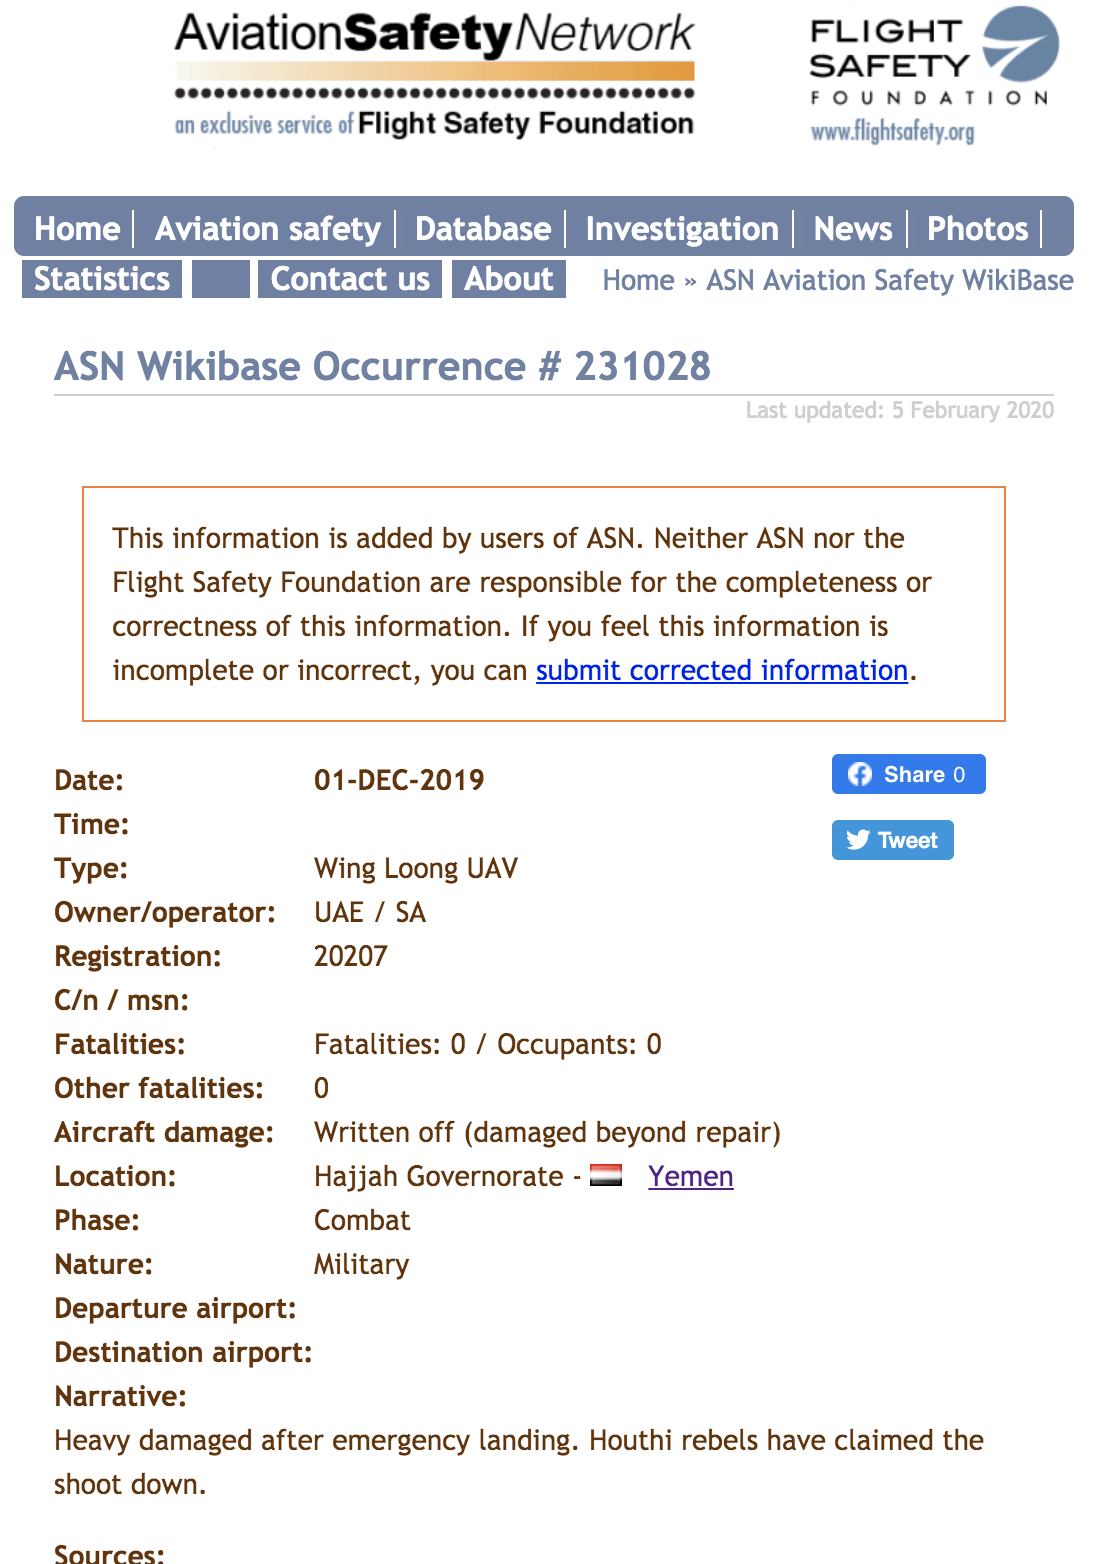 ing-Loong-1-aviation-safety